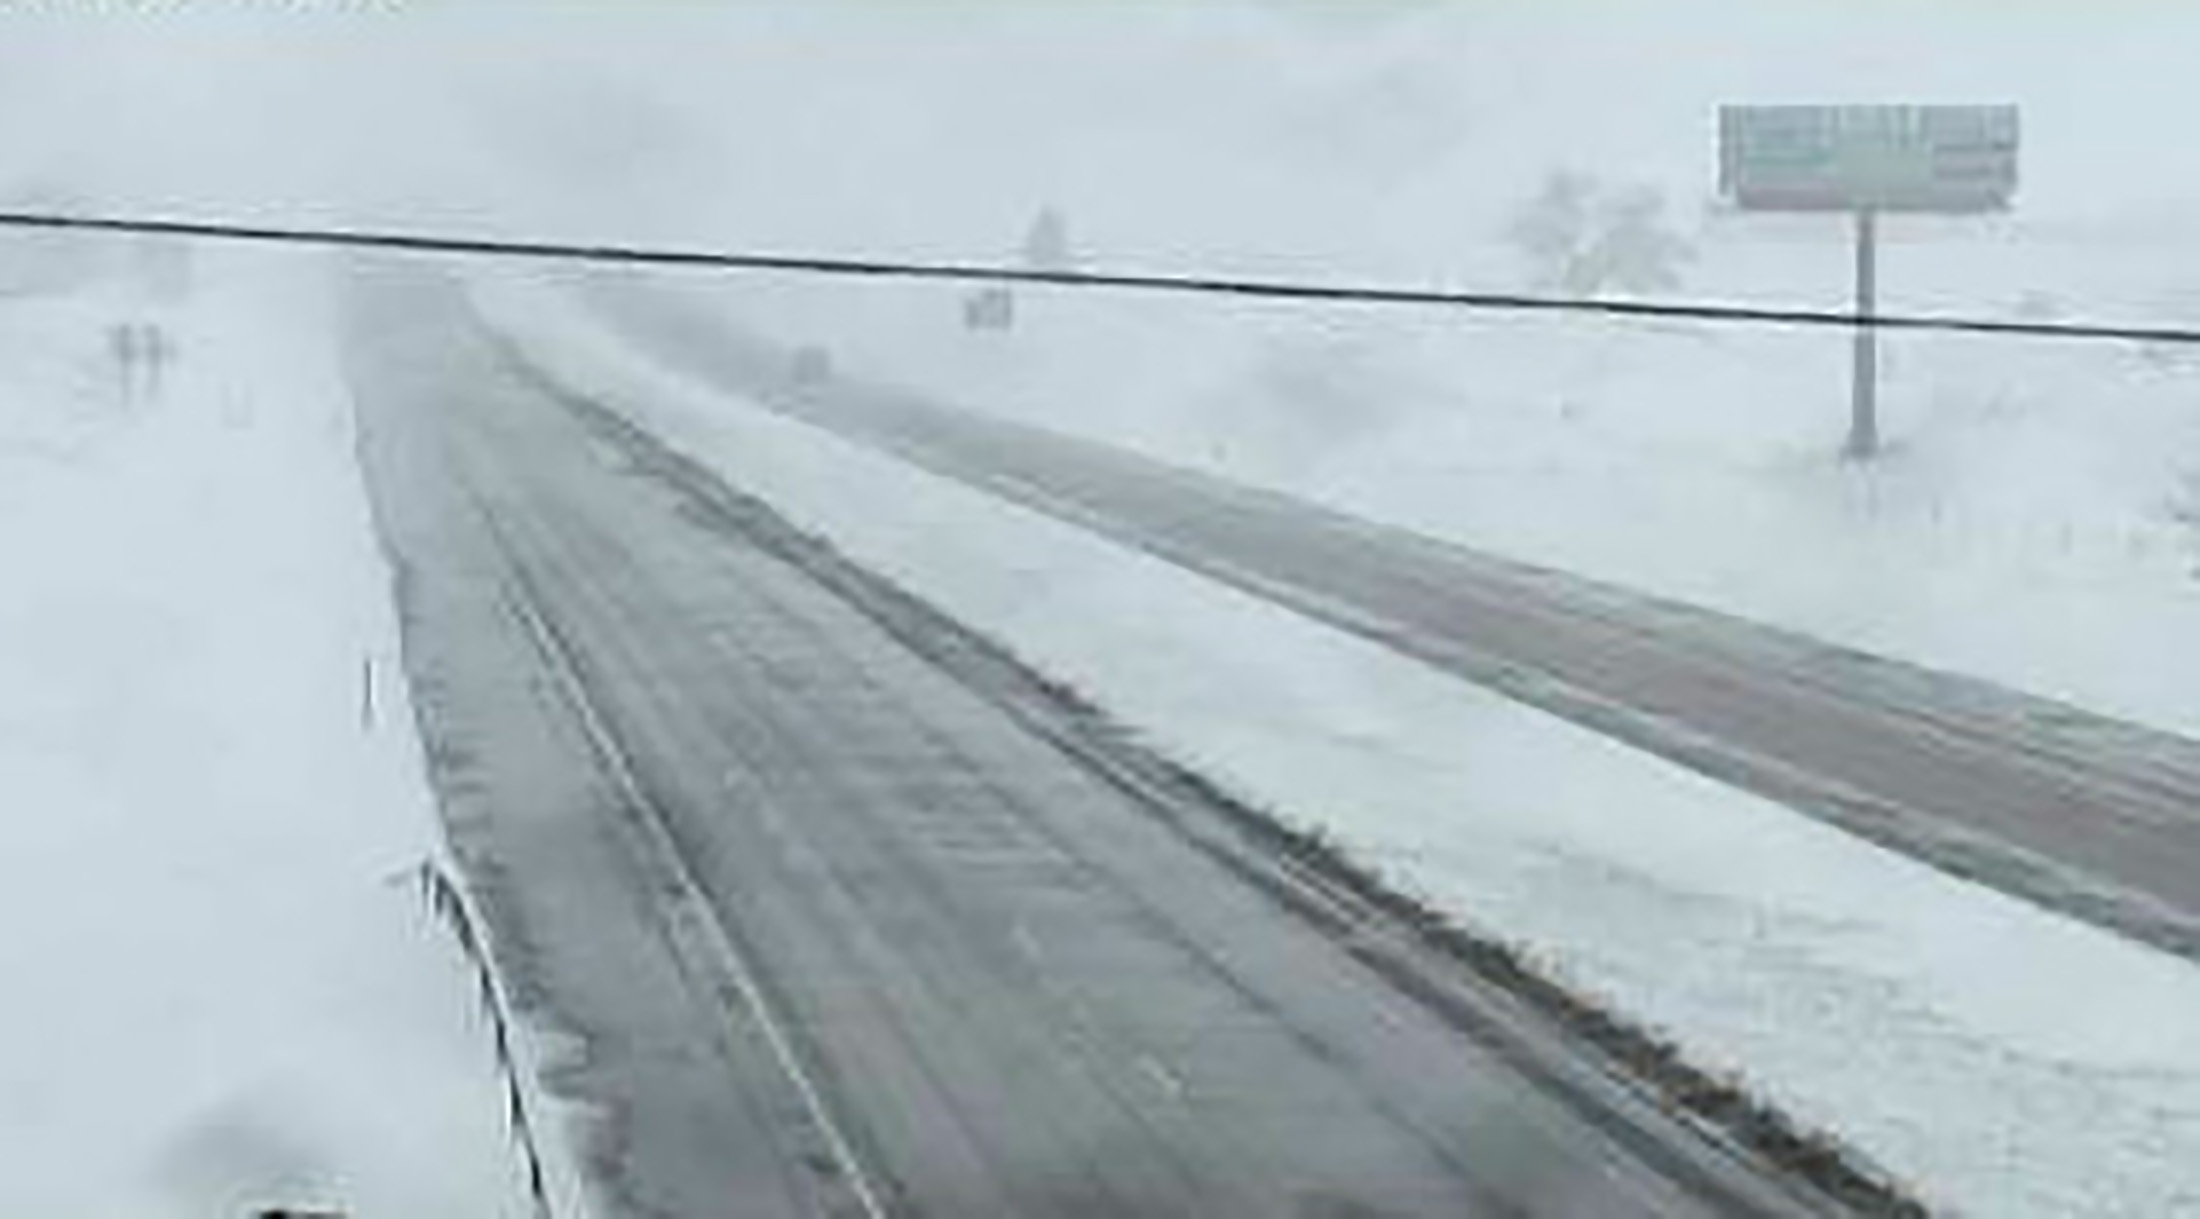 Snow covers the ground off Interstate 90 east of Sturgis, South Dakota, in this view from a highway camera taken Sunday.  Hail, snow, a tornado and a tropical storm made it a 'severe weather' Mother's Day in much of the center of the United States and on the Carolina coast on Sunday. | SOUTH DAKOTA DEPARTMENT OF TRANSPORTATION / HANDOUT  / REUTERS